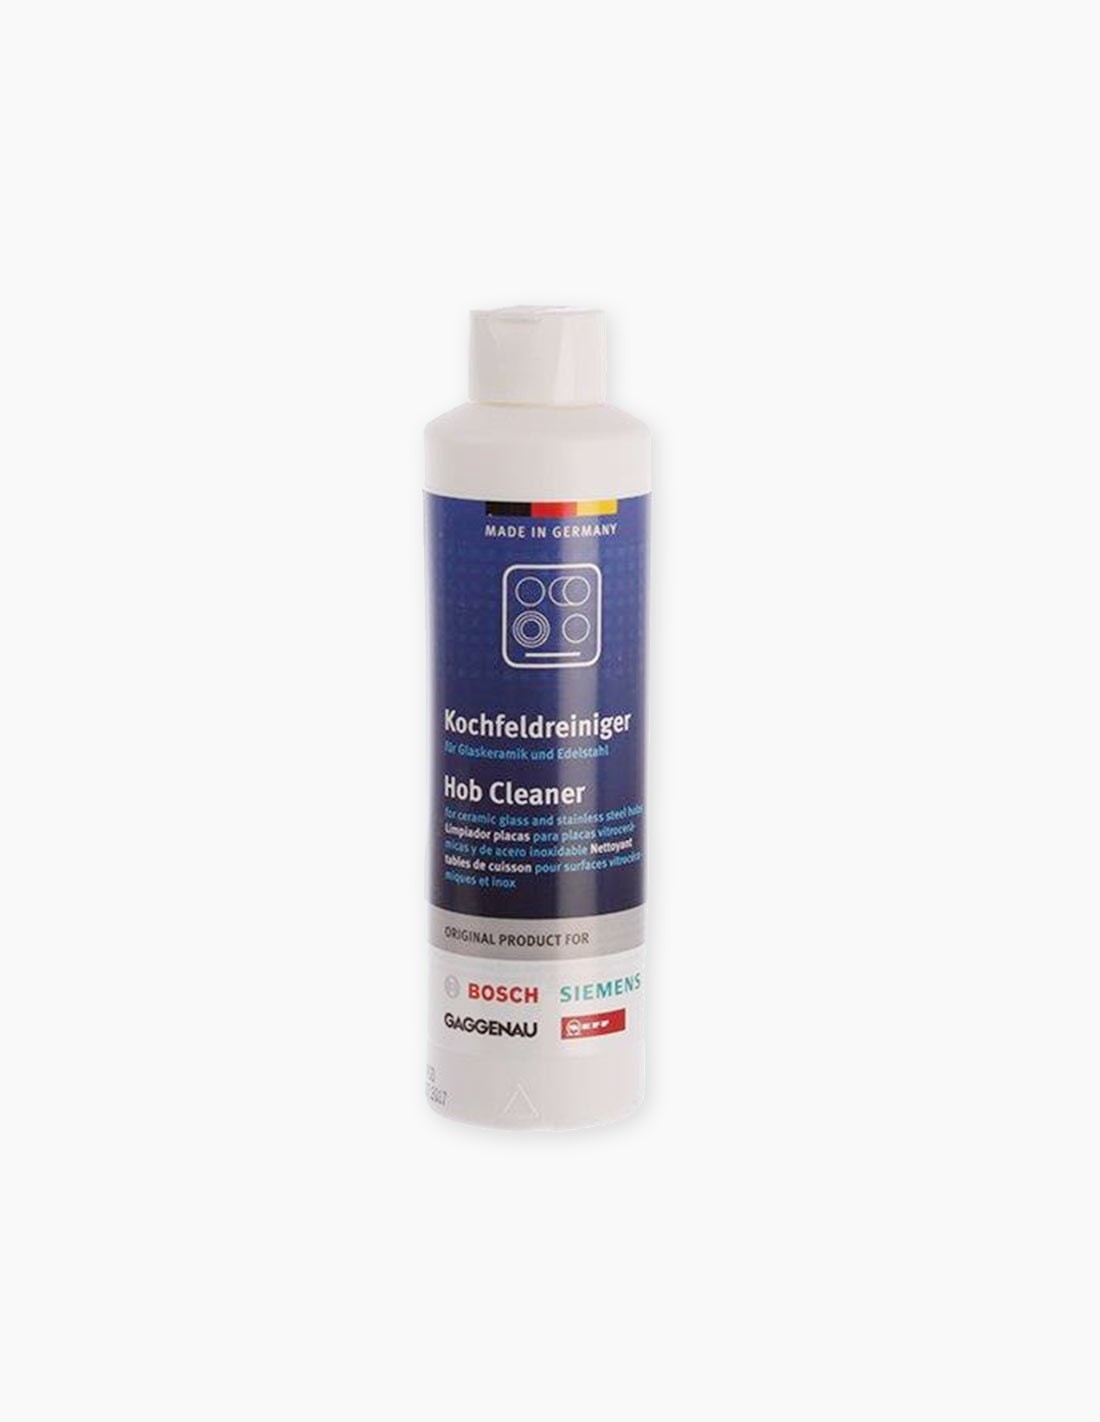 Degreaser for induction vitroceramic hobs - Care + Protect - Benelux -  French Care+Protect